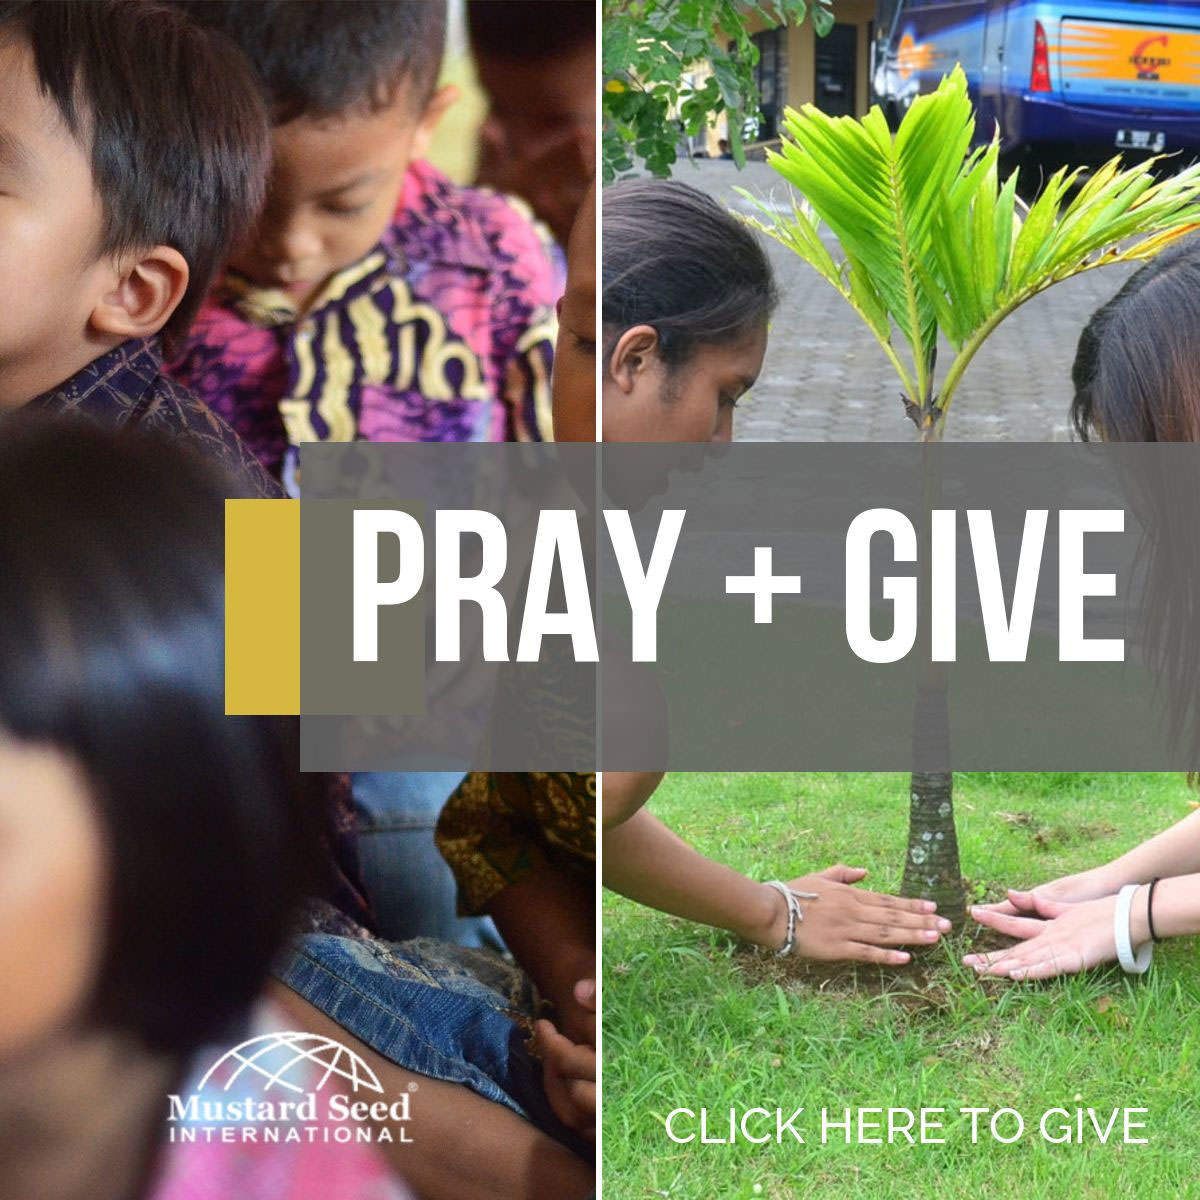 Pray and give